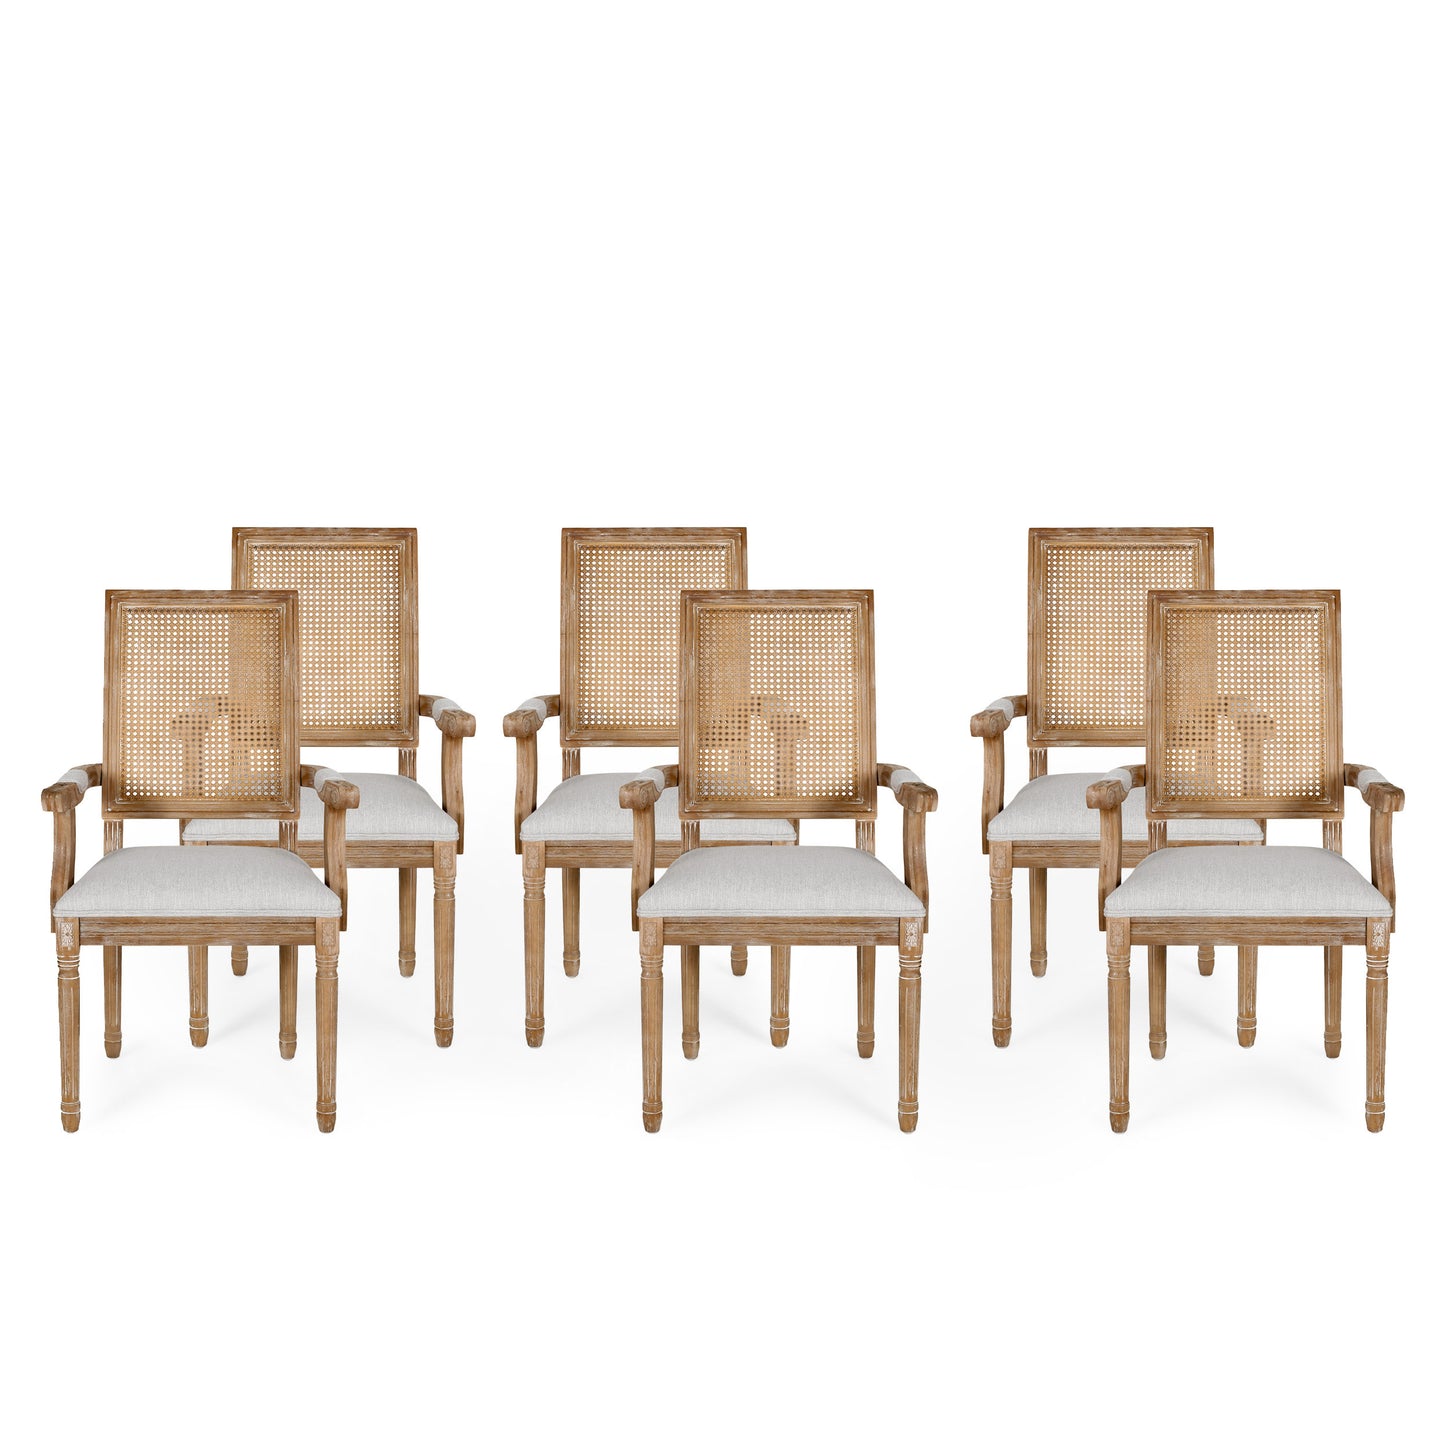 Zentner French Country Upholstered Wood and Cane Upholstered Dining Chairs, Set of 6